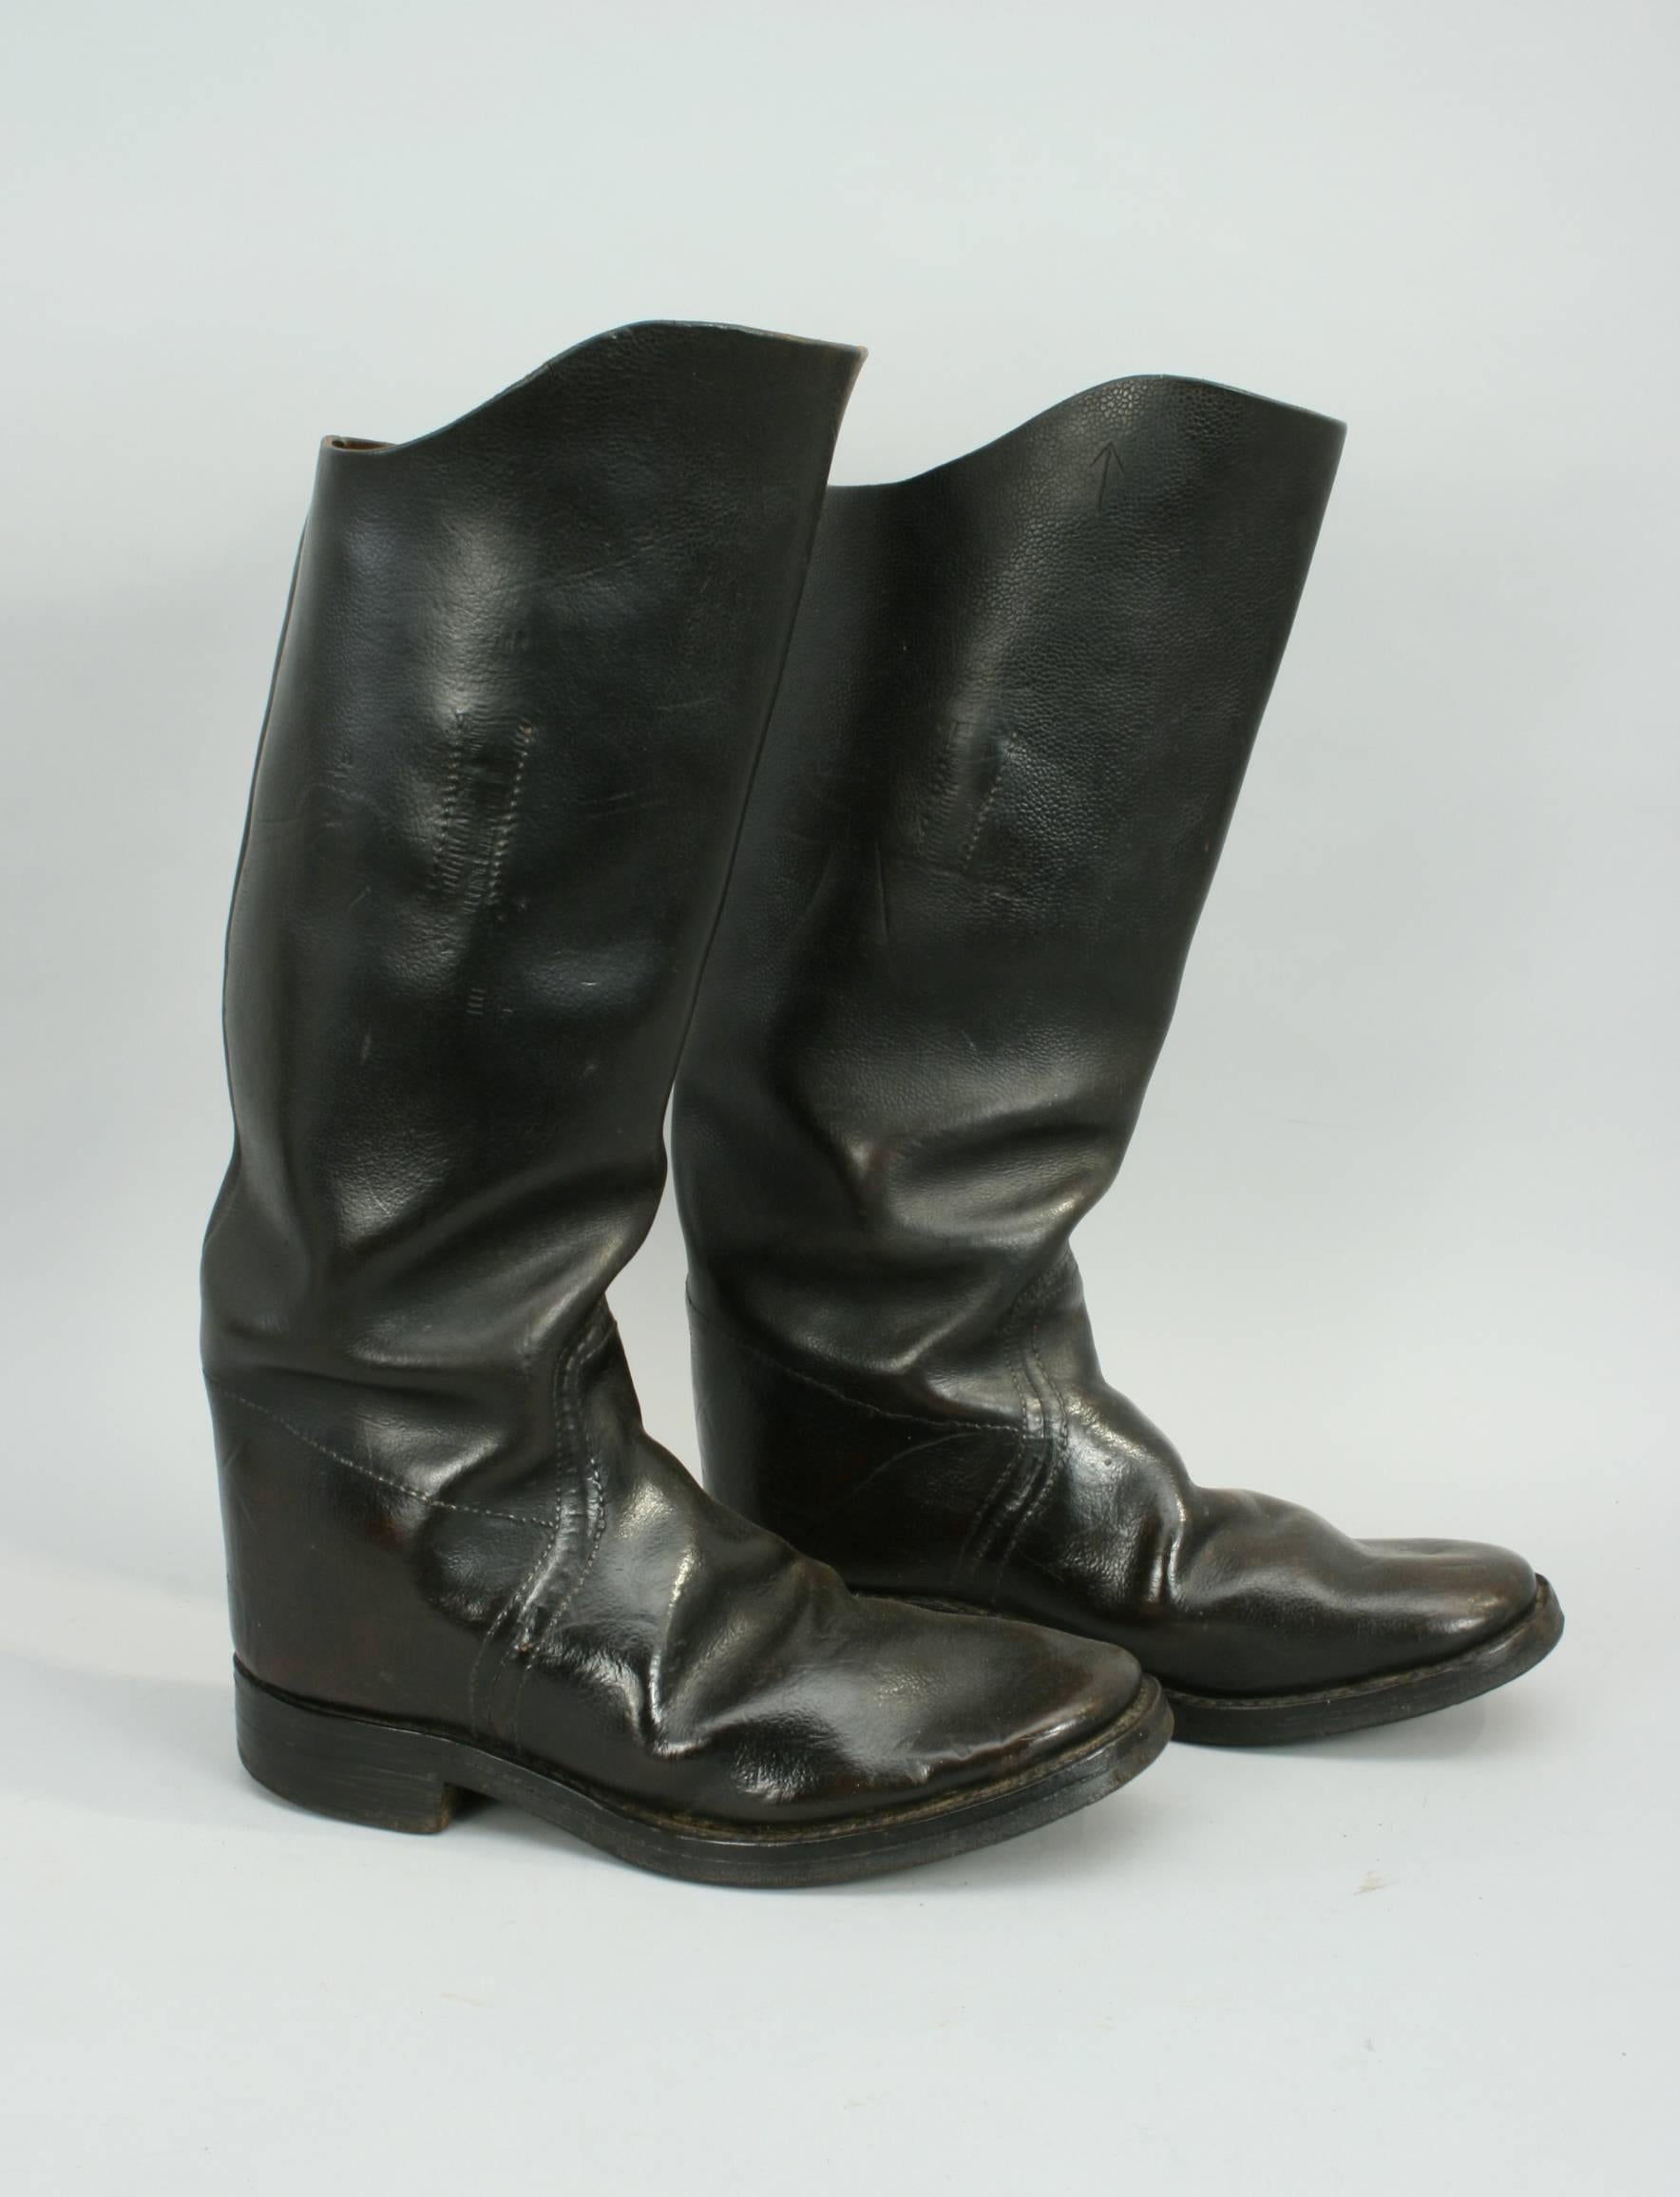 Vintage leather cavalry / artillery boots.
A very good-looking pair of black leather knee high boots. These boots are stamped with an arrow mark suggesting that they were government issue. The boots are stamped with the maker's name 'ADAMS BROS.